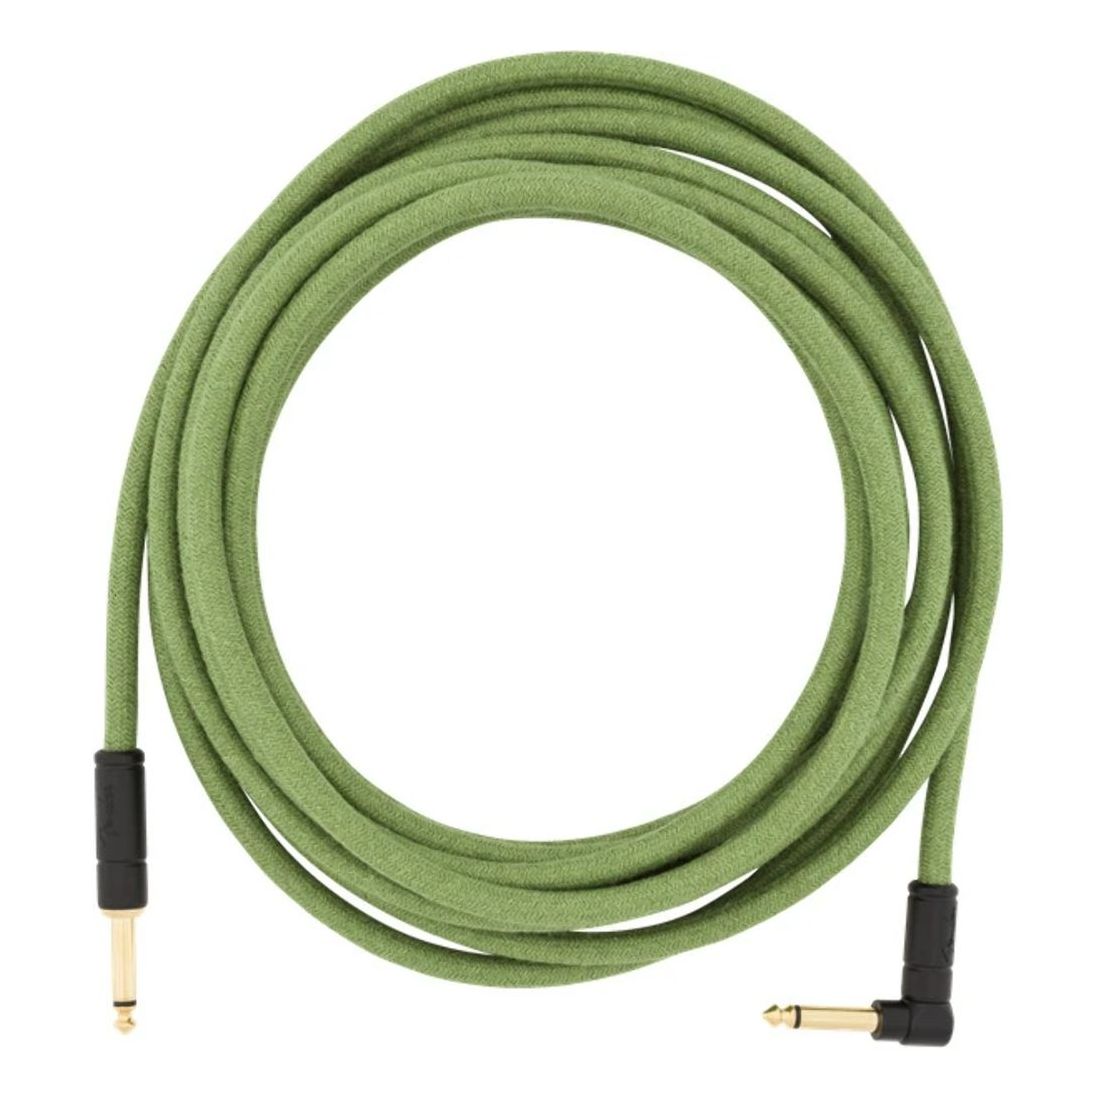 Fender Deluxe 18.6 Angle Instrument Cable Pure Hemp Green